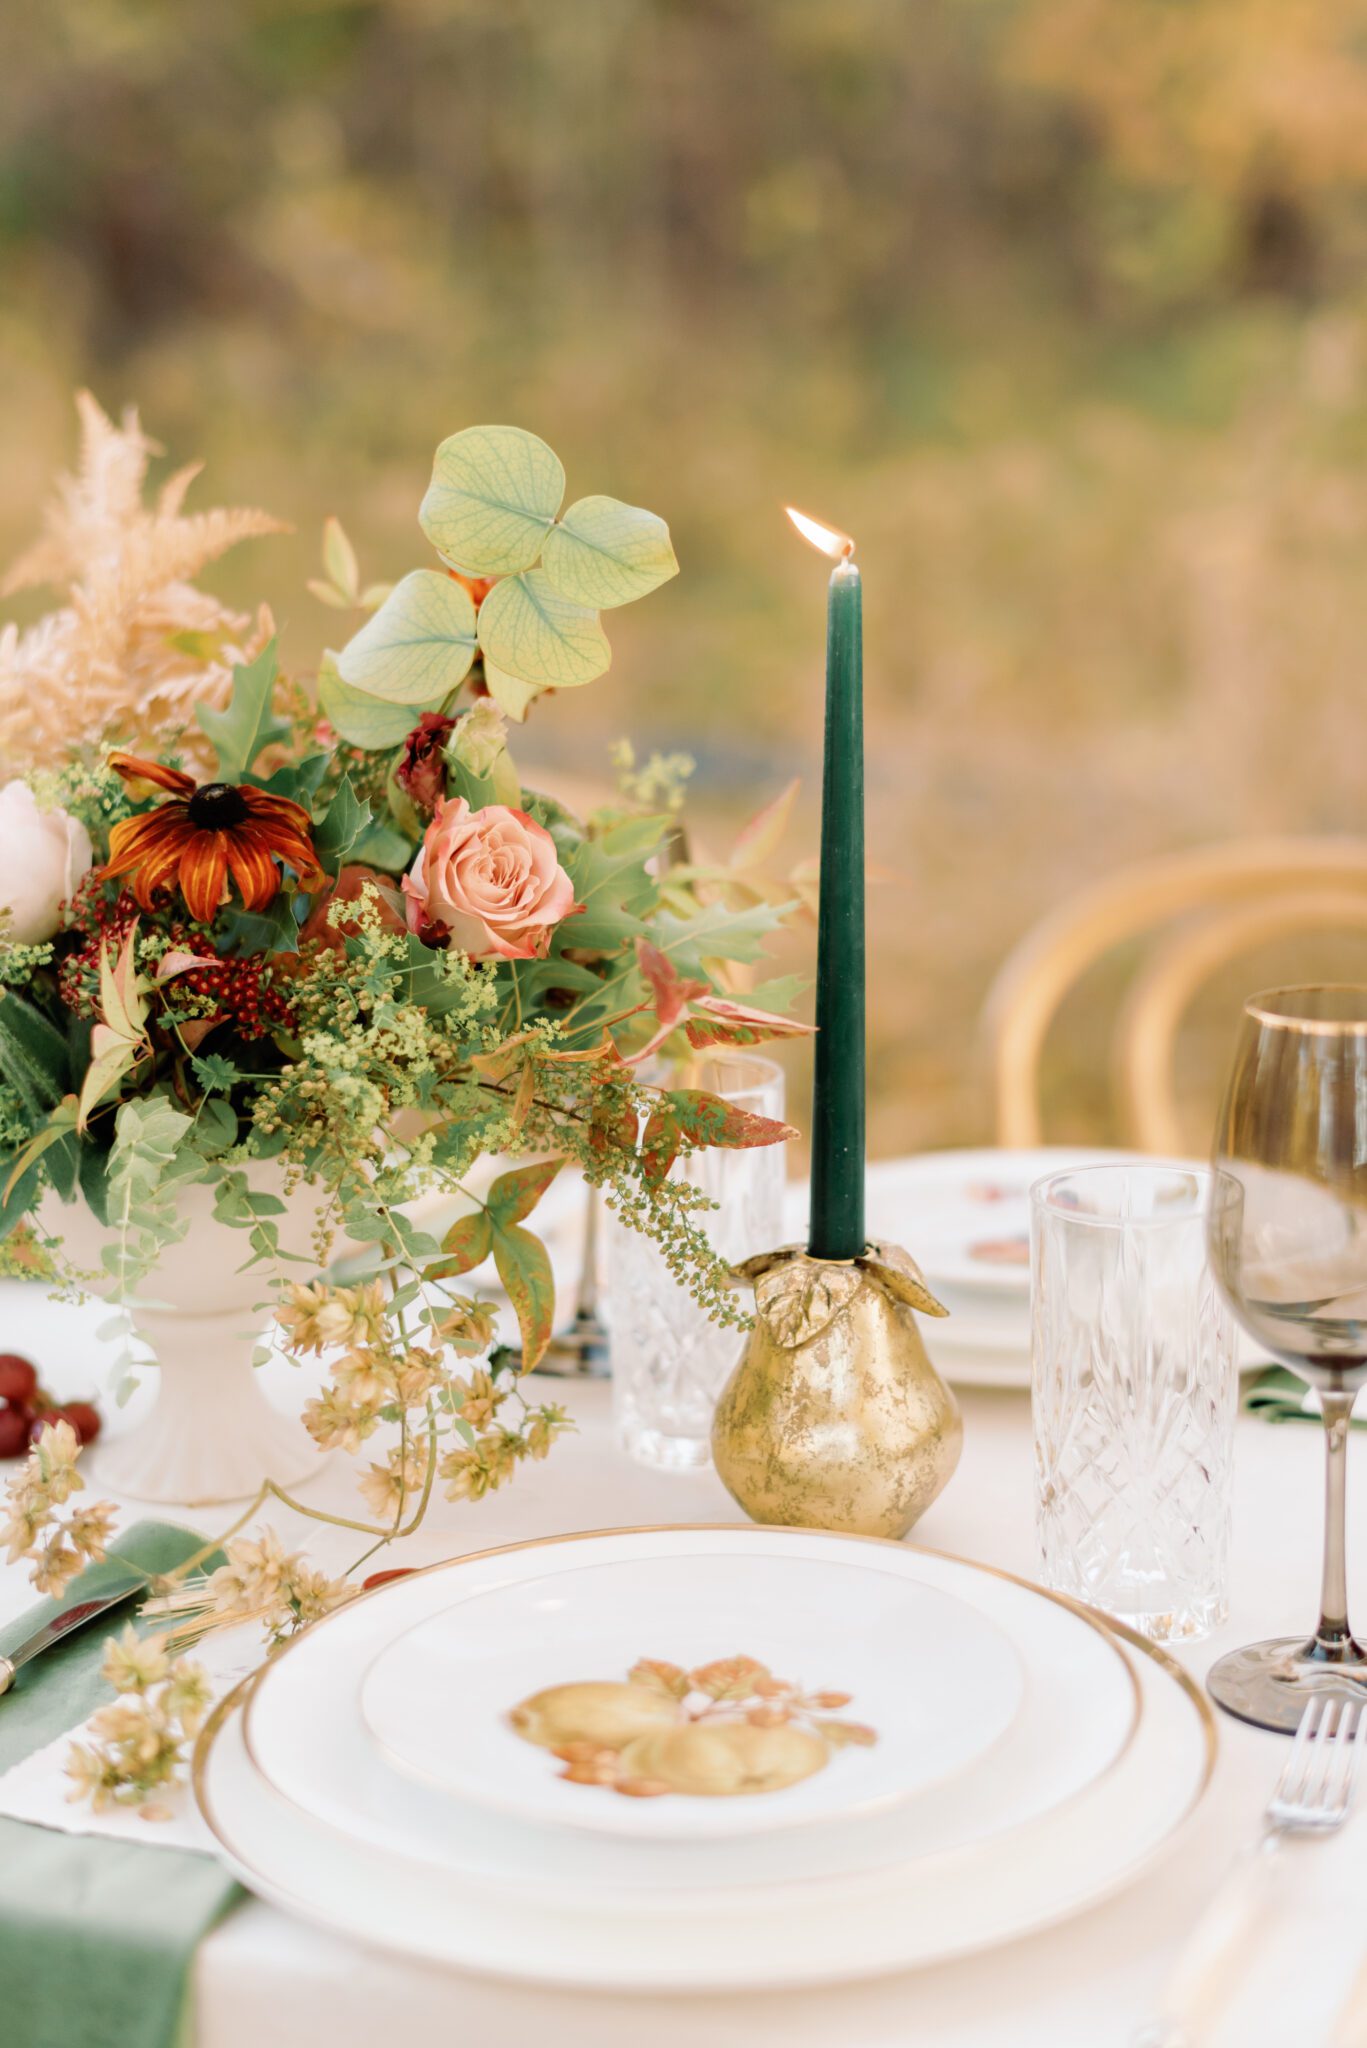 Al fresco dining at golden hour. Wedding reception tablescape featuring olive green, burgundy and rust details, elegant menus with crimson wax seals and gold tassel accents. Intimate autumn wedding designed and planned by Rebekah Bronte. 